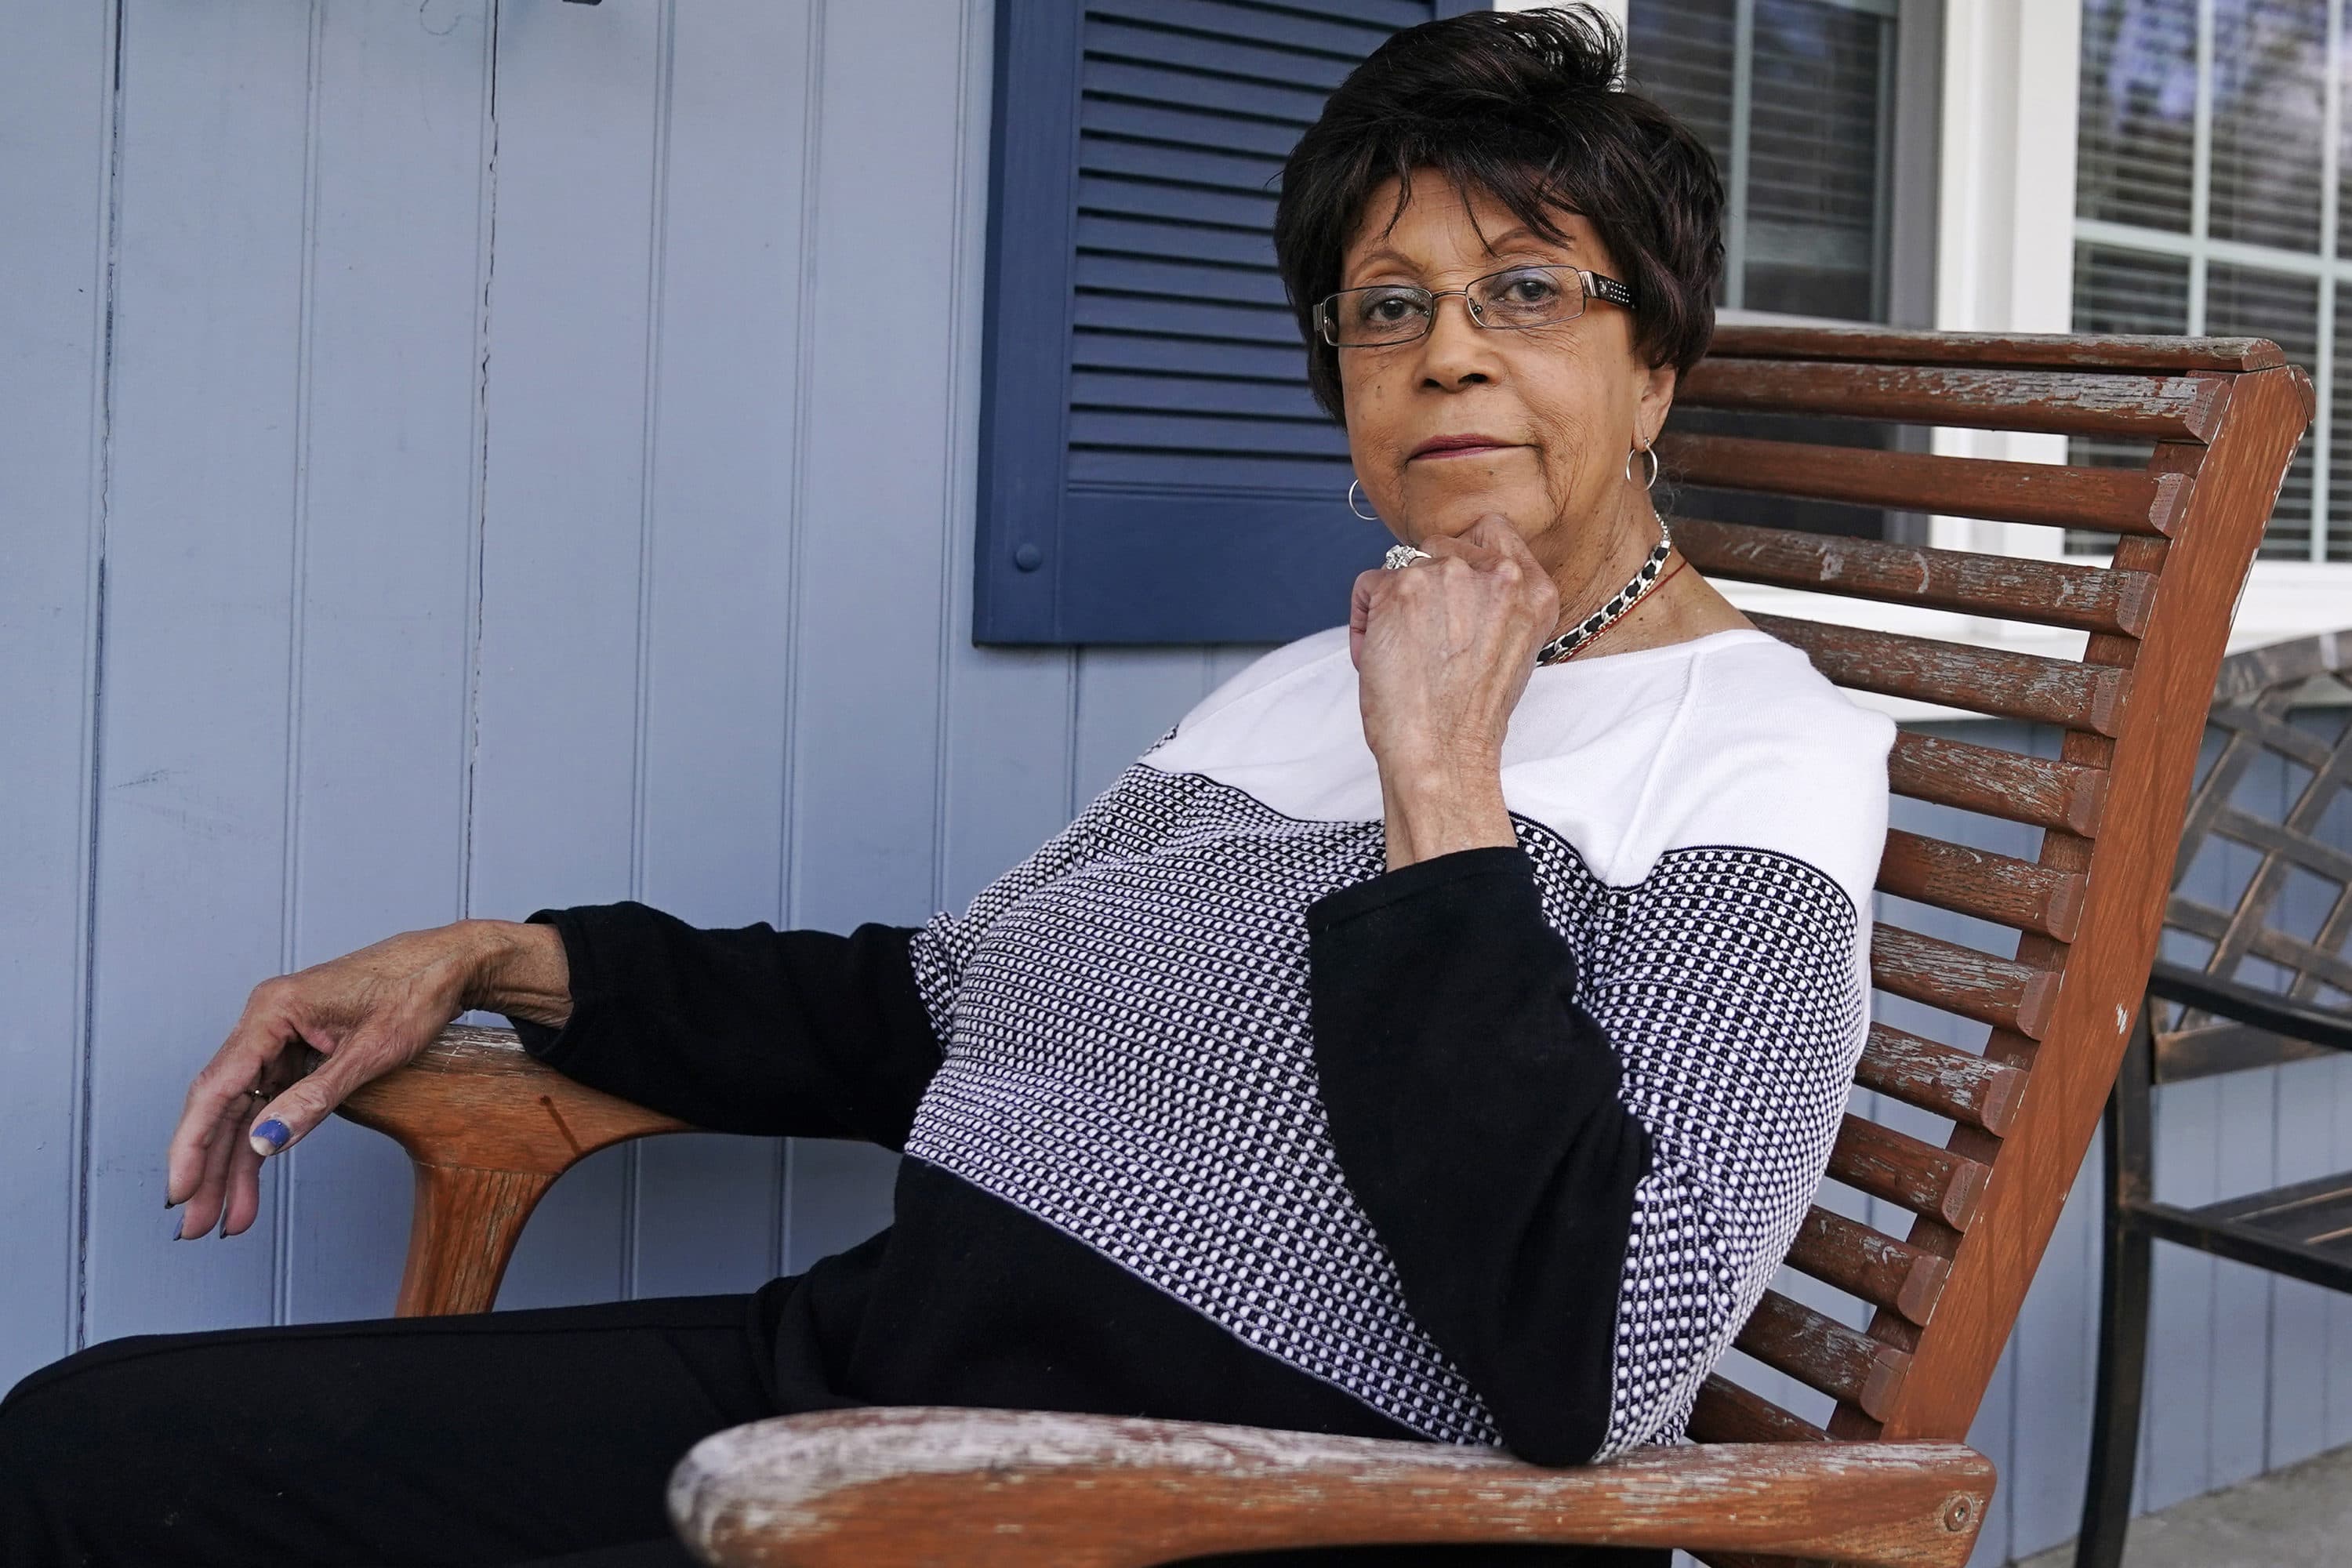 Roberta Wolff, a descendant of Tony, Cuba and Darby Vassall who were enslaved by Harvard benefactors in the institution's first decades, poses on the front porch of her family home, April 27, 2022, in Bellingham, Mass. (Charles Krupa/AP)